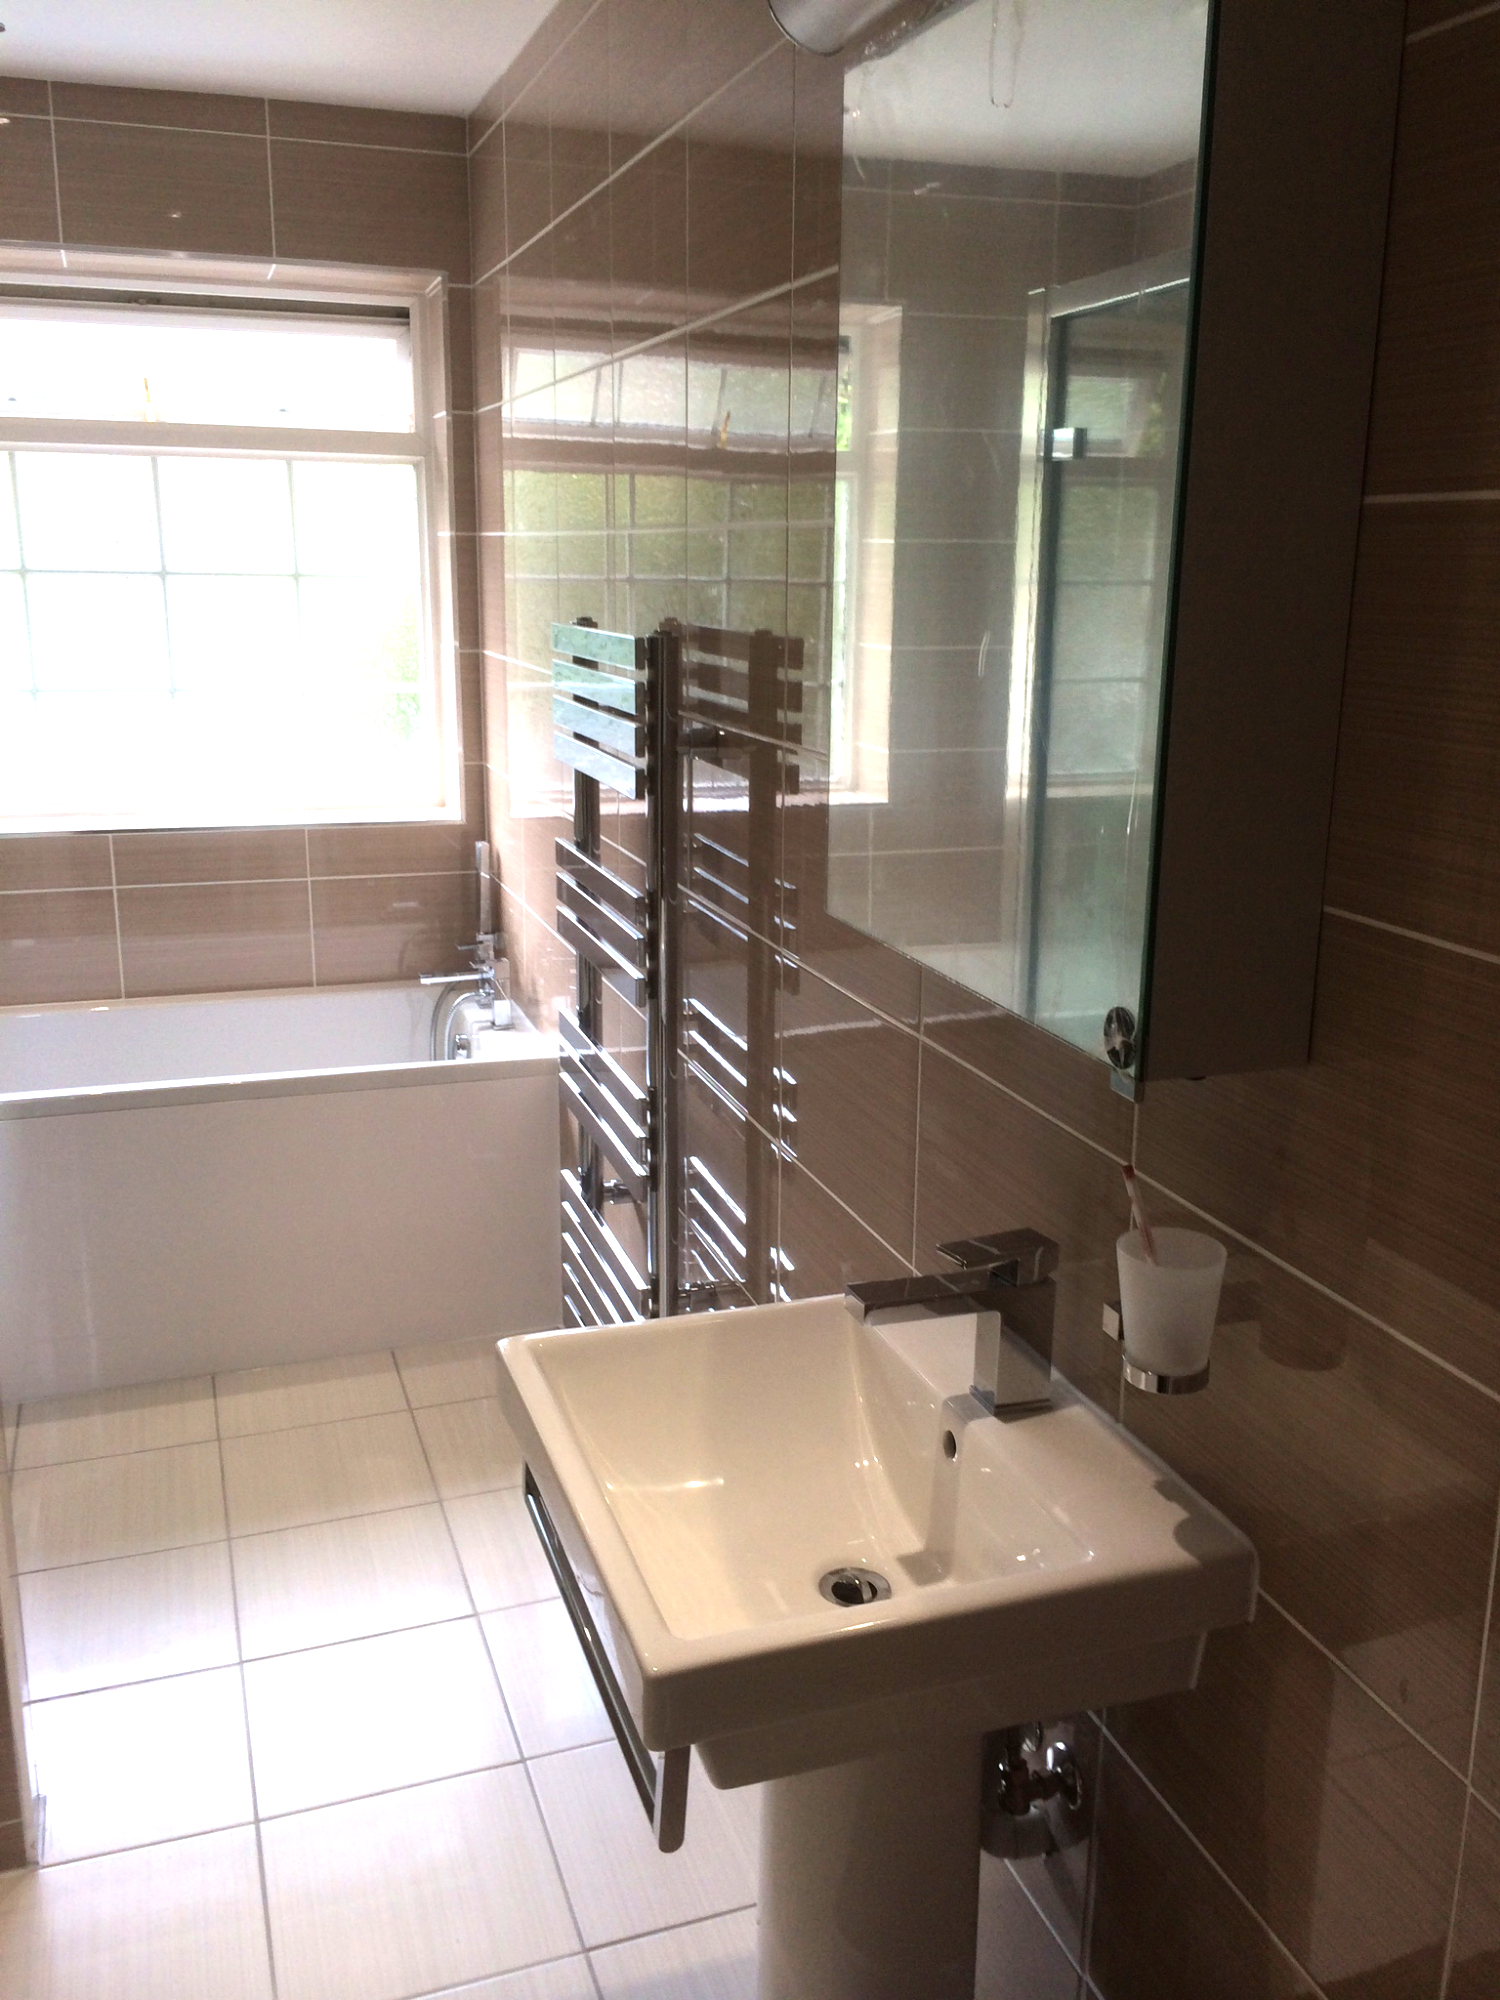 recommended bathroom installer hook, recommended builder and quality bathroom installations in camberley, recommended bathroom company in basingstoke recommended builder guildford, recommended bathroom installations farnham, recommended bath and shower room ensuite and wet room installations in Hartley Wintney, recommended domestic builder for total home renovations including wetrooms, recommended bathroom installer elstead, recommended bathroom installer liss,recommended builder chiddingfold,Farnborough, Camberley, Cranleigh, Guildford, Fleet, Farnham, Hook, Old Basing, Basingstoke, Oakley, Winchester, Sandhurst, Staines, Epsom, Leatherhead, Send, Woking, Wimbledon, High Wycombe, Crowthorne, Addlestone, Godalming, Aldershot, Bentley, Dorney, Burnham Common, Wokingham, Newbury, Oxford, Marlow, Basingstoke, Andover, Winchester, Romsey, Bordon, Yateley, Wasing, Reading, Chieveley, Burleigh, Barkham, Hurst, Lightwater, Windlesham, Wentworth, Sunningdale, Windsor, Chobham, Chertsey, Chilworth, 